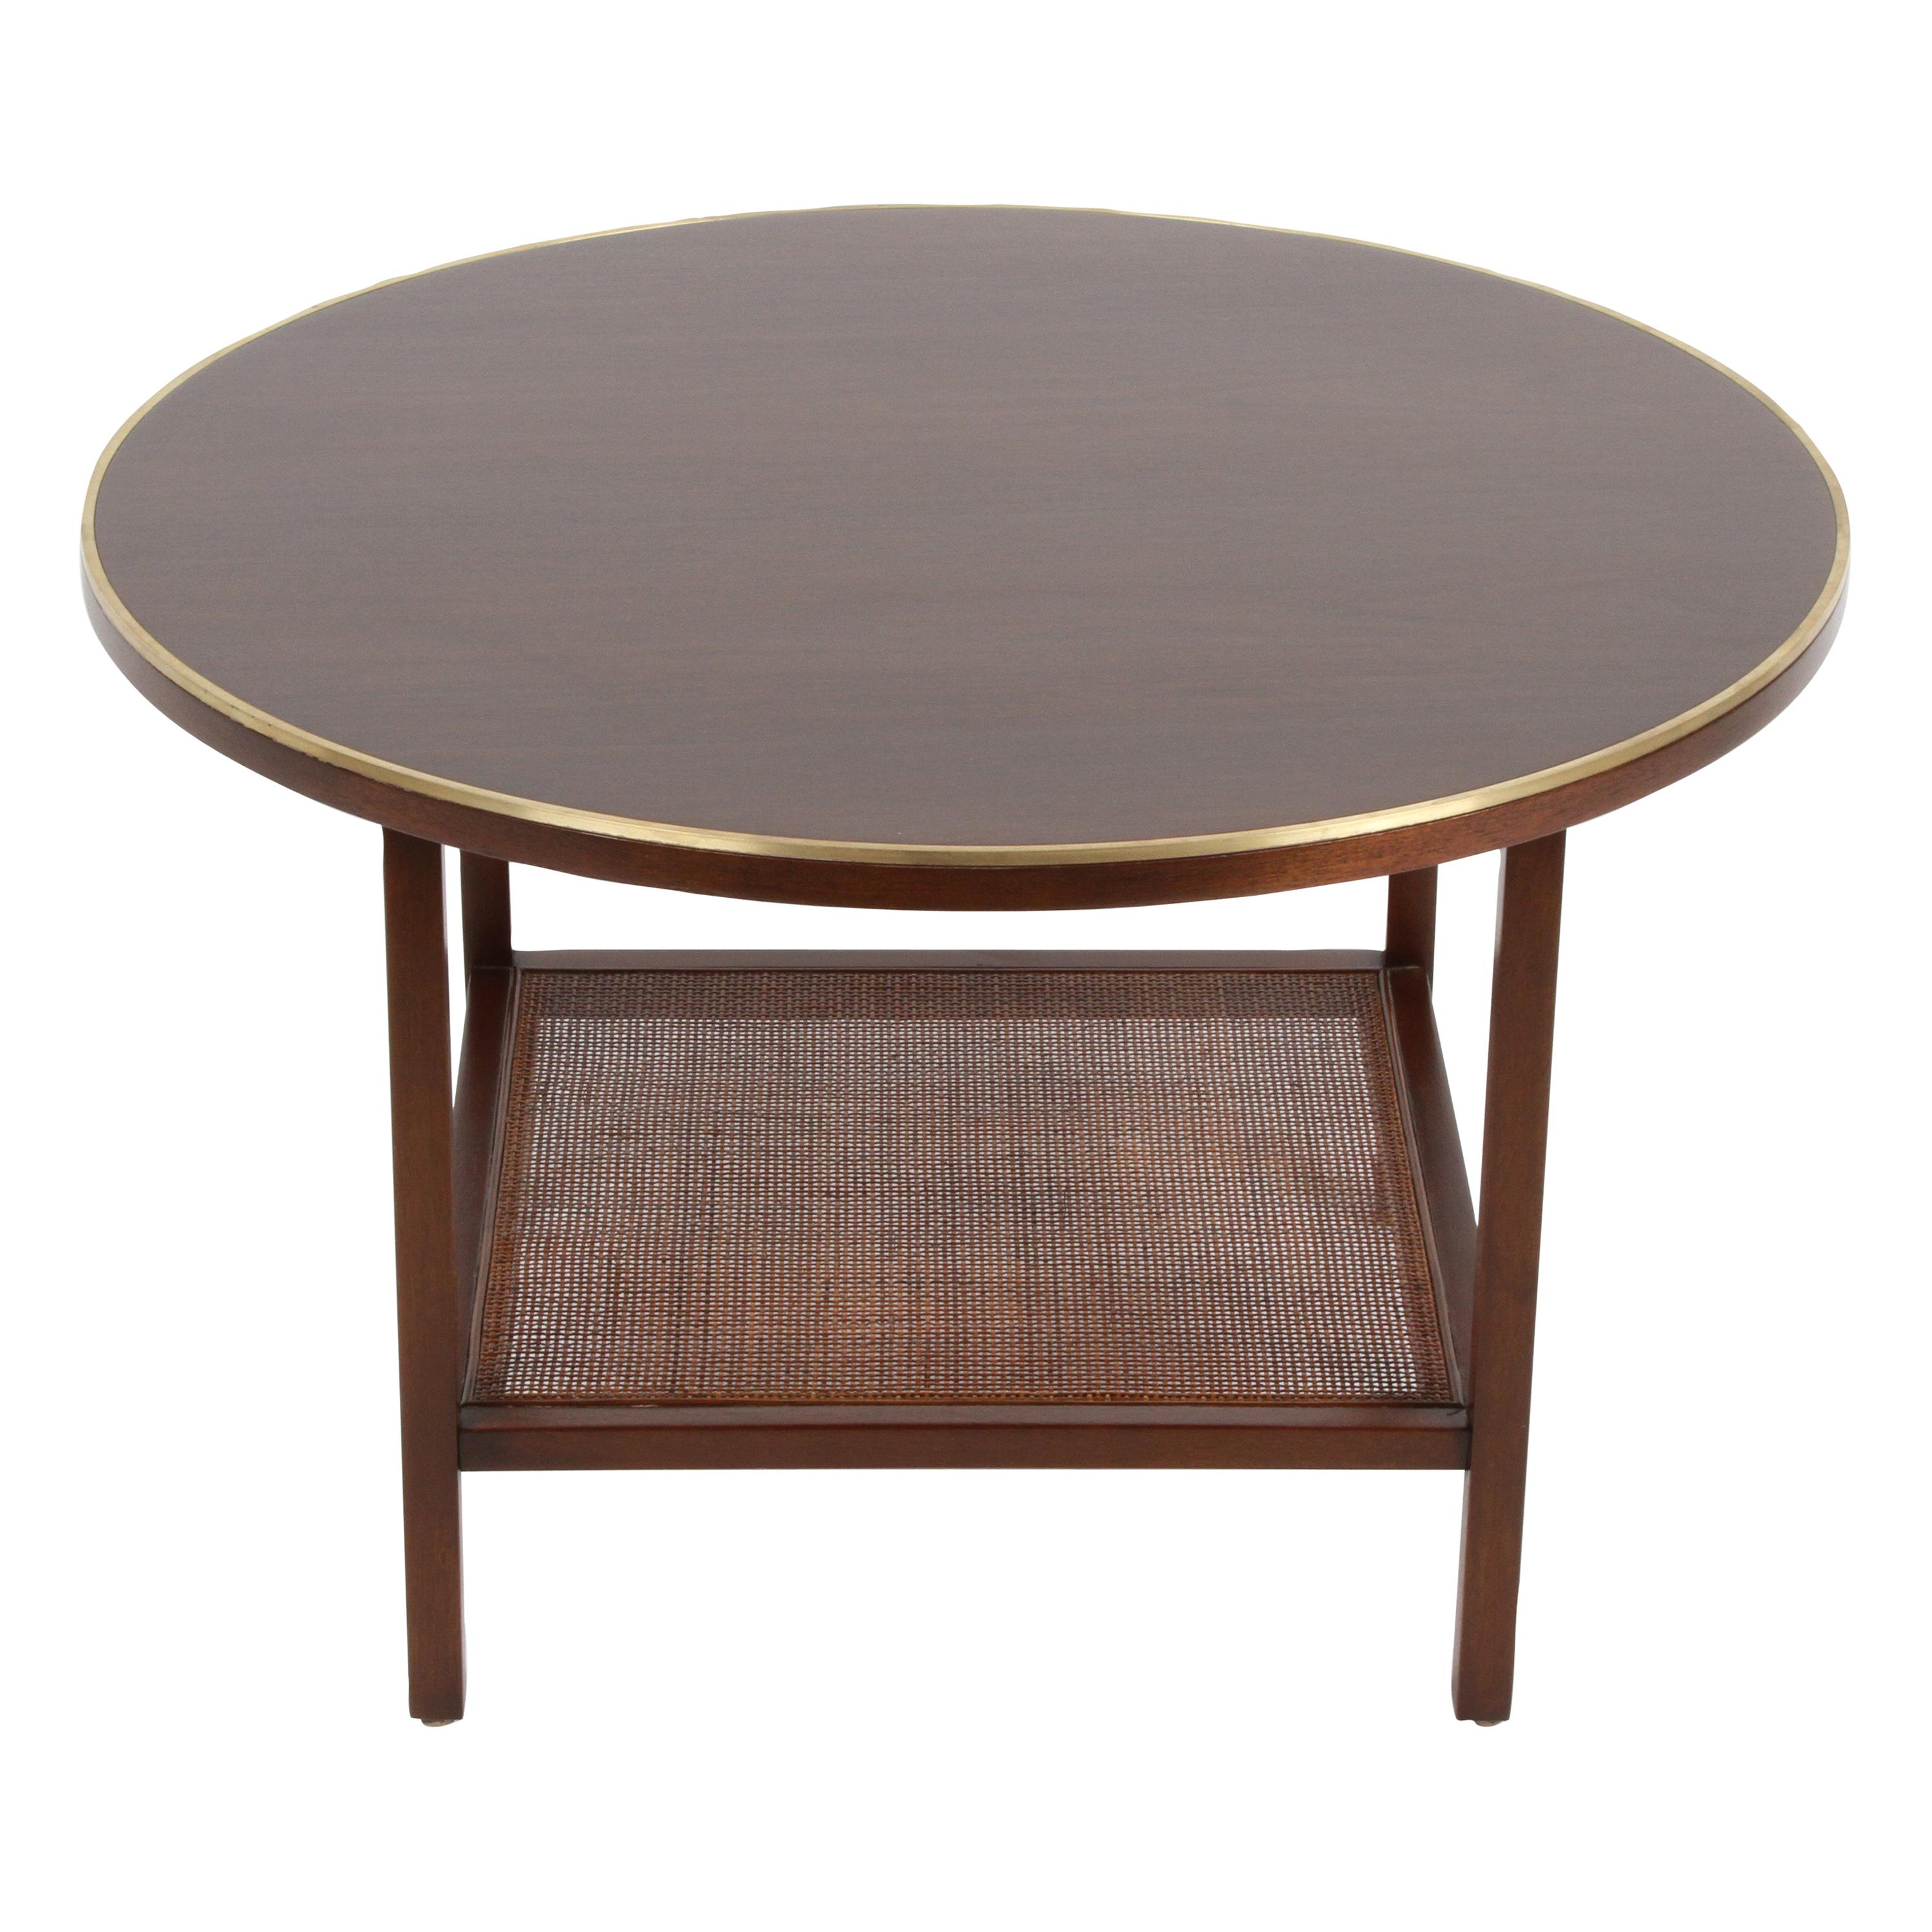 Paul McCobb for Calvin Round Mahogany, Wicker with Brass Trim Side or End Table